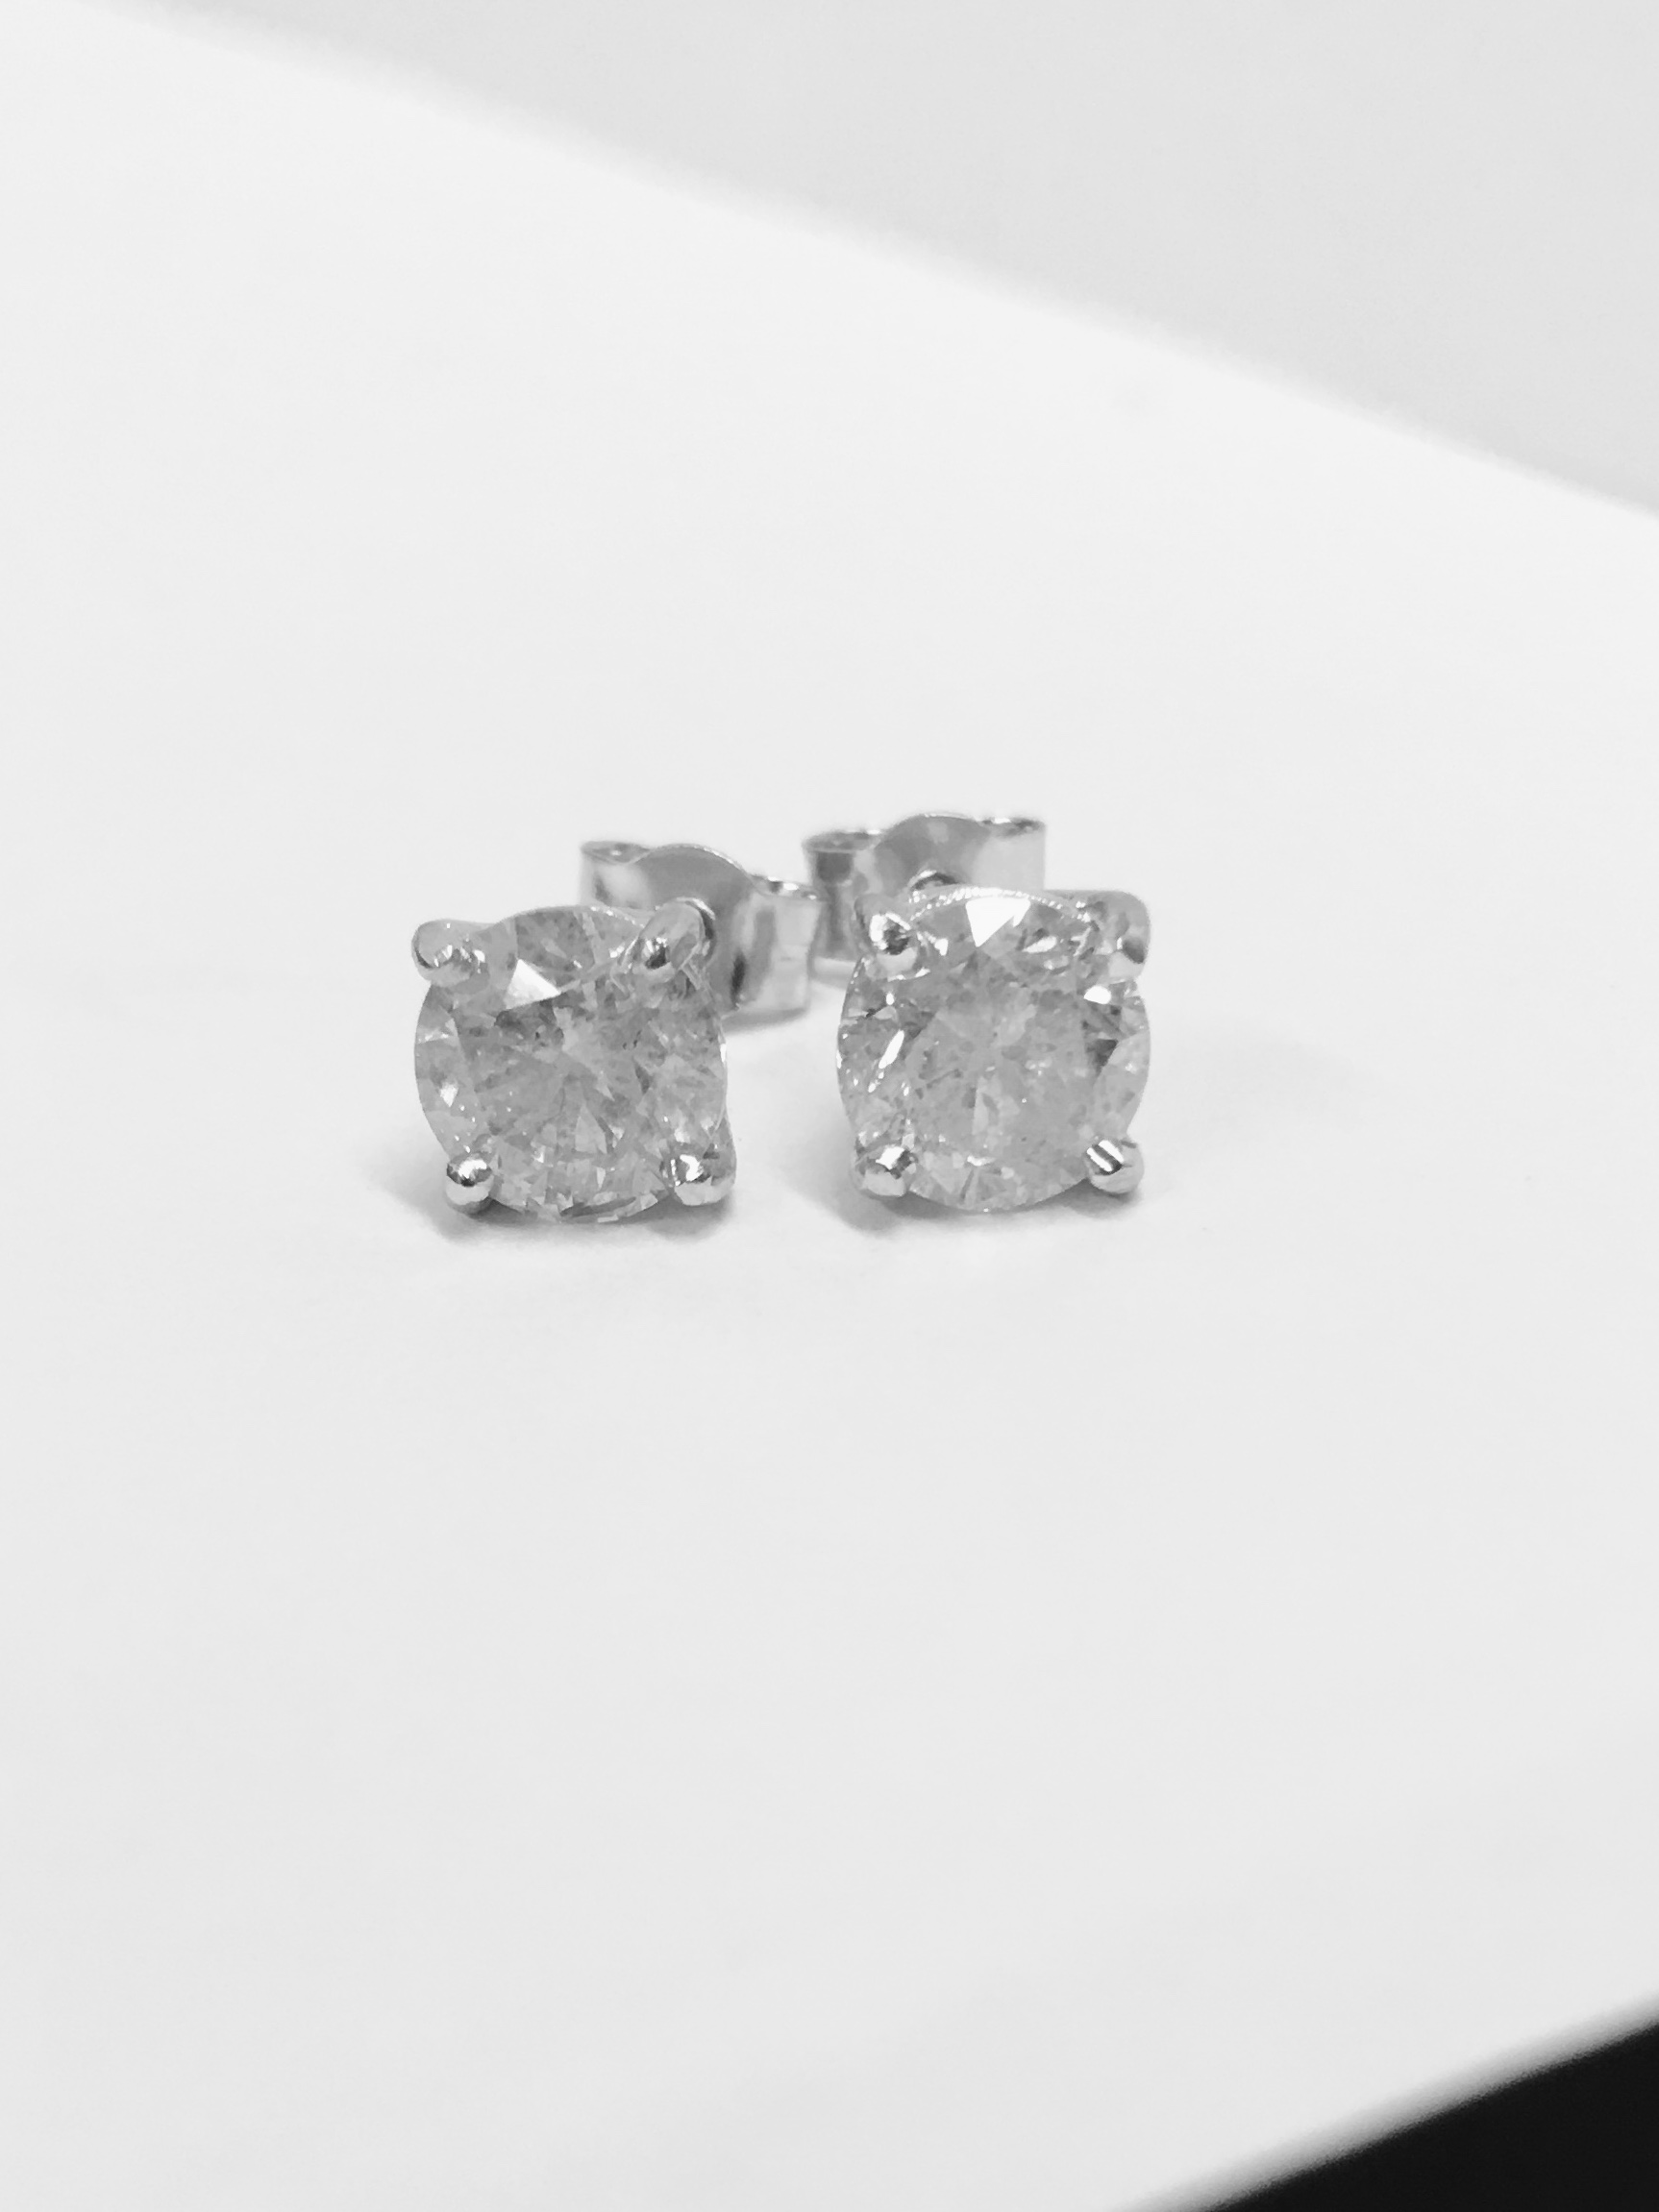 1ct diamond solitaire earrings - Image 13 of 24